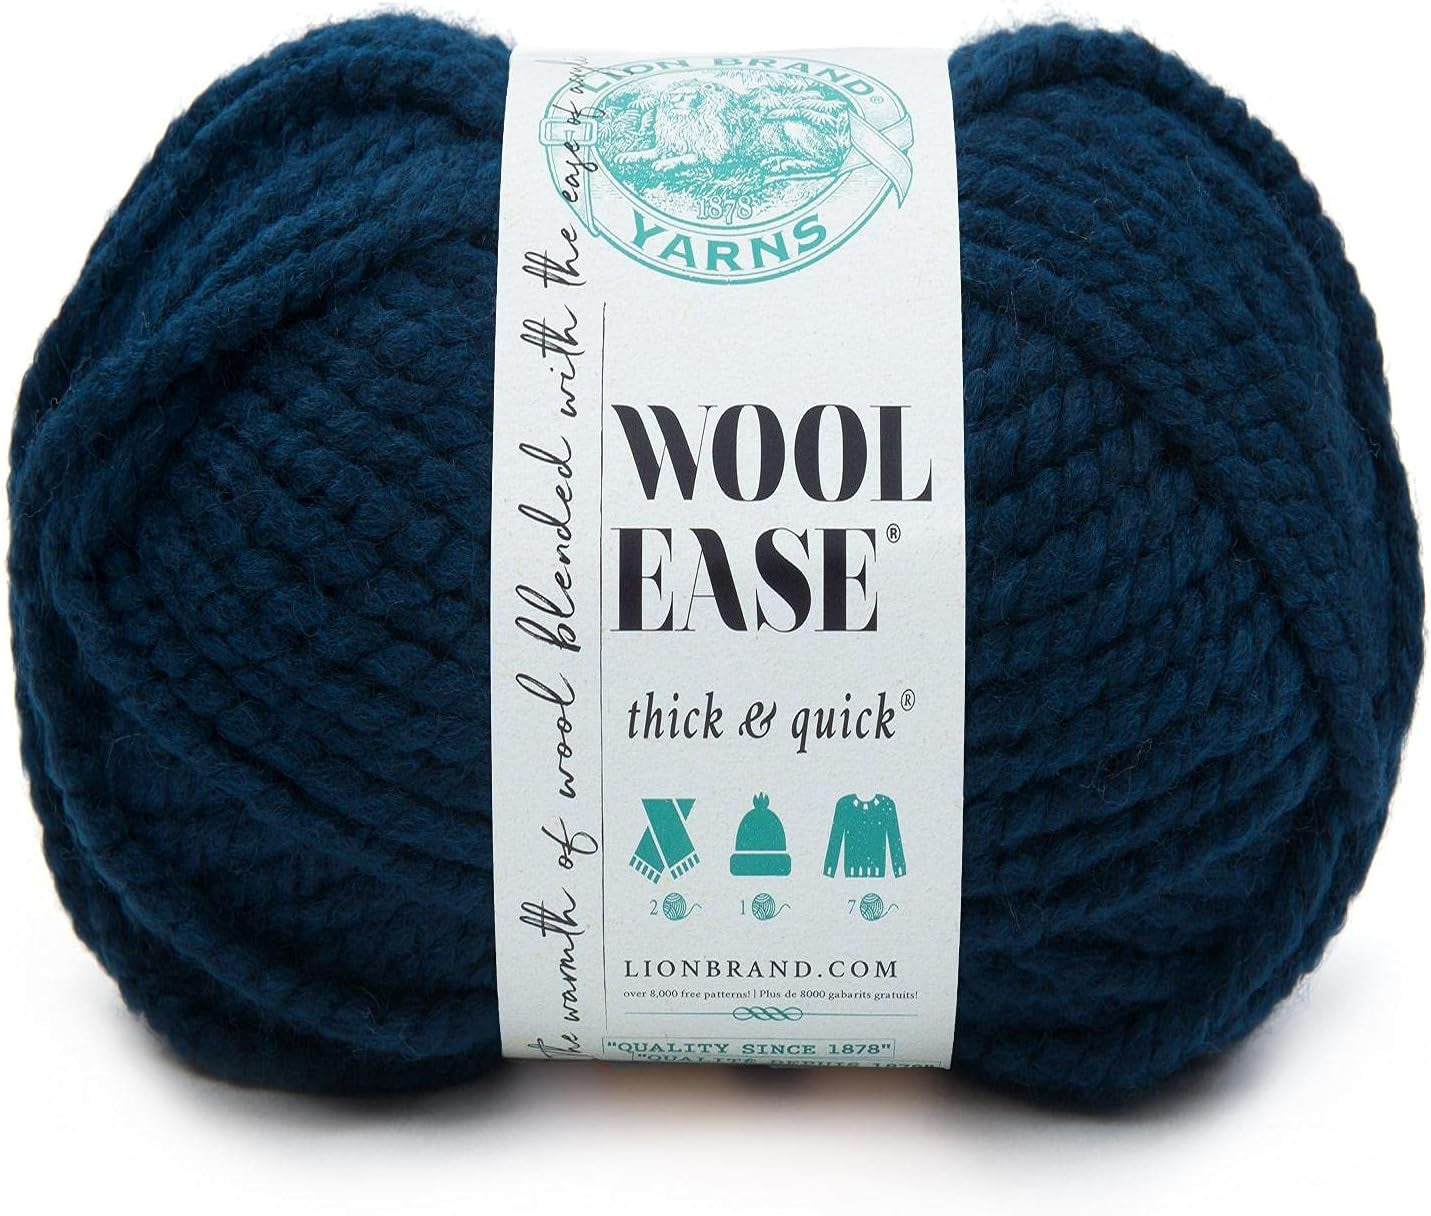 Wool-Ease Thick & Quick Yarn, Soft and Bulky Yarn for Knitting, Crocheting, and Crafting, 1 Skein, Fossil